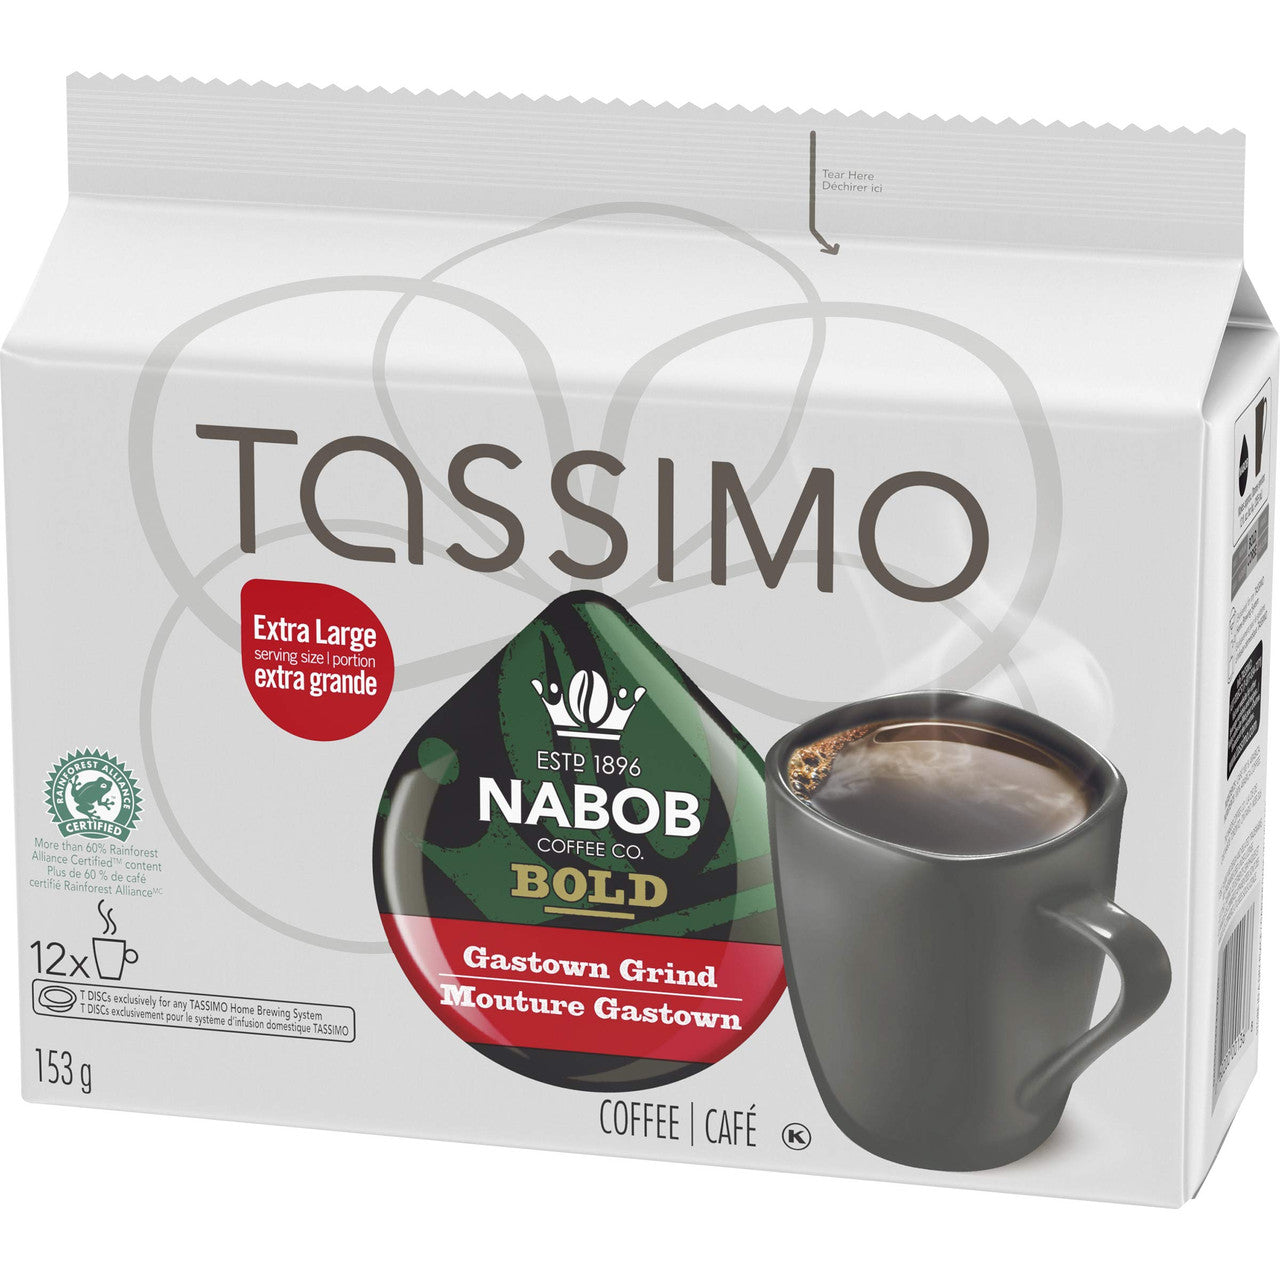 Tassimo Nabob Bold Gastown Grind Coffee, 12 T-Discs, {Imported from Canada}